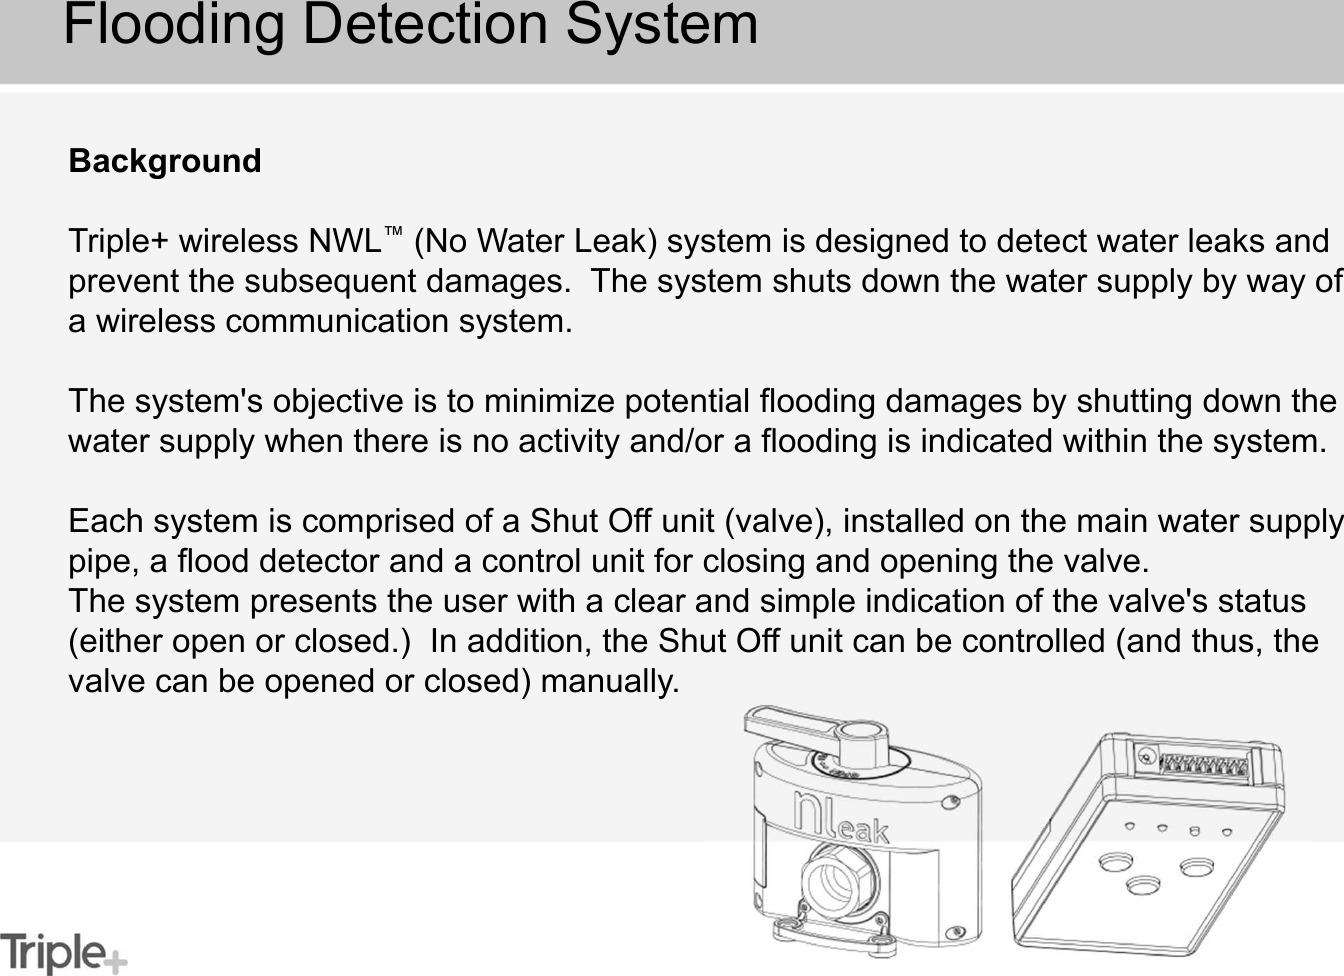 Flooding Detection SystemBackgroundTriple+ wireless NWL™(No Water Leak) system is designed to detect water leaks and prevent the subsequent damages.  The system shuts down the water supply by way of a wireless communication system.The system&apos;s objective is to minimize potential flooding damages by shutting down the water supply when there is no activity and/or a flooding is indicated within the system.Each system is comprised of a Shut Off unit (valve), installed on the main water supply pipe, a flood detector and a control unit for closing and opening the valve.The system presents the user with a clear and simple indication of the valve&apos;s status (either open or closed.)  In addition, the Shut Off unit can be controlled (and thus, the valve can be opened or closed) manually.